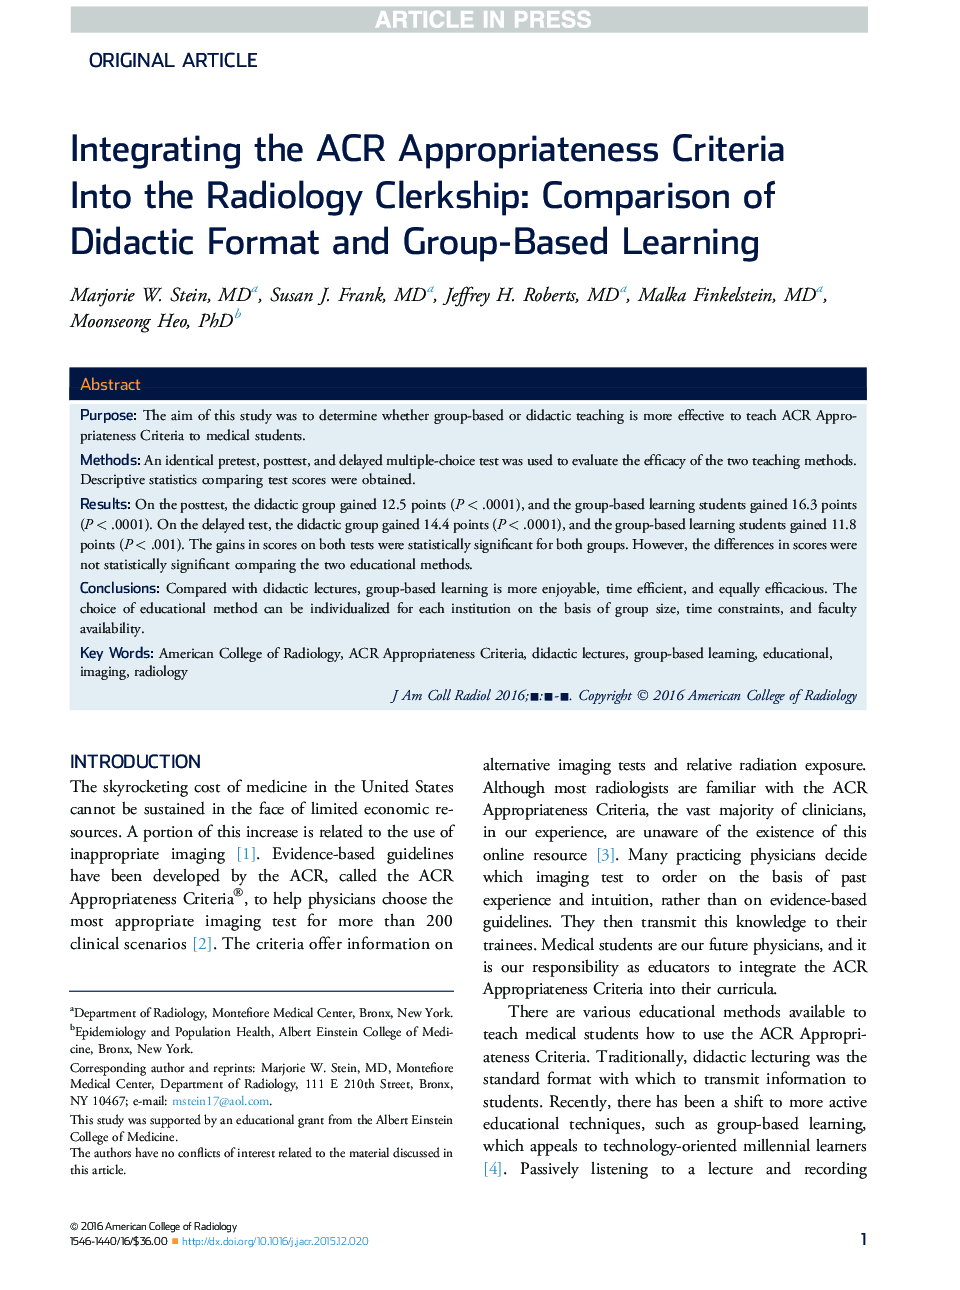 Integrating the ACR Appropriateness Criteria Into the Radiology Clerkship: Comparison of Didactic Format and Group-Based Learning